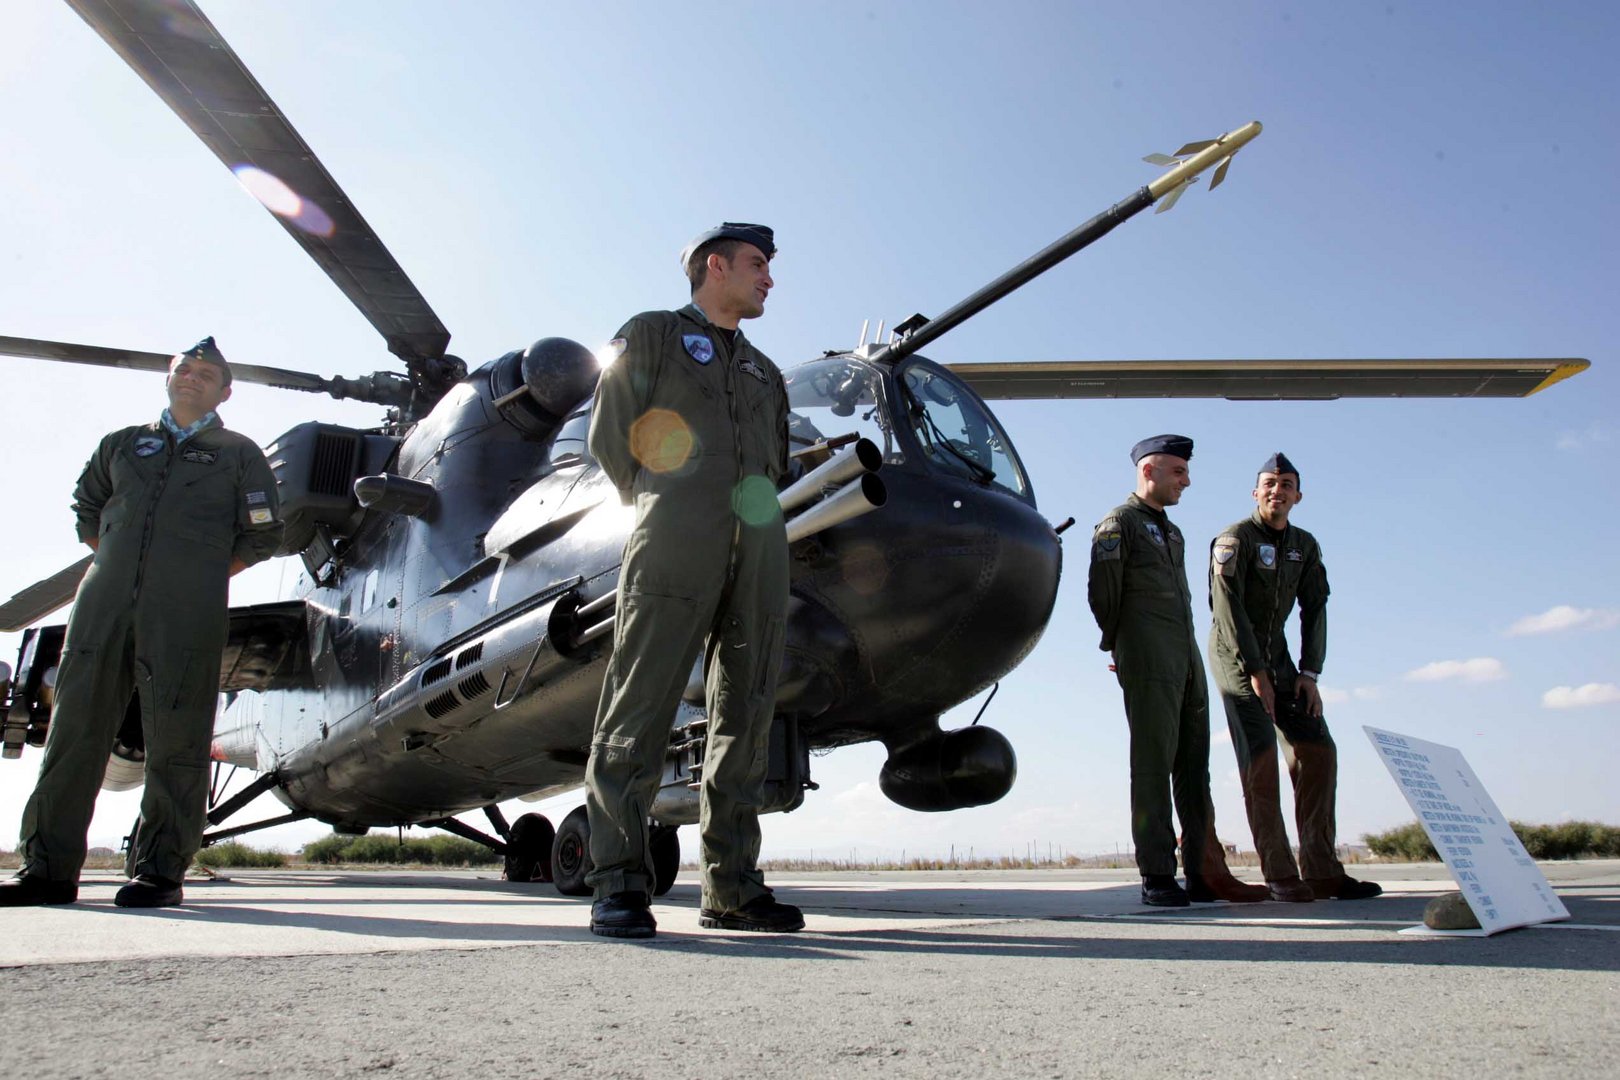 image Serbia seeking to buy Cyprus’ ageing combat helicopters